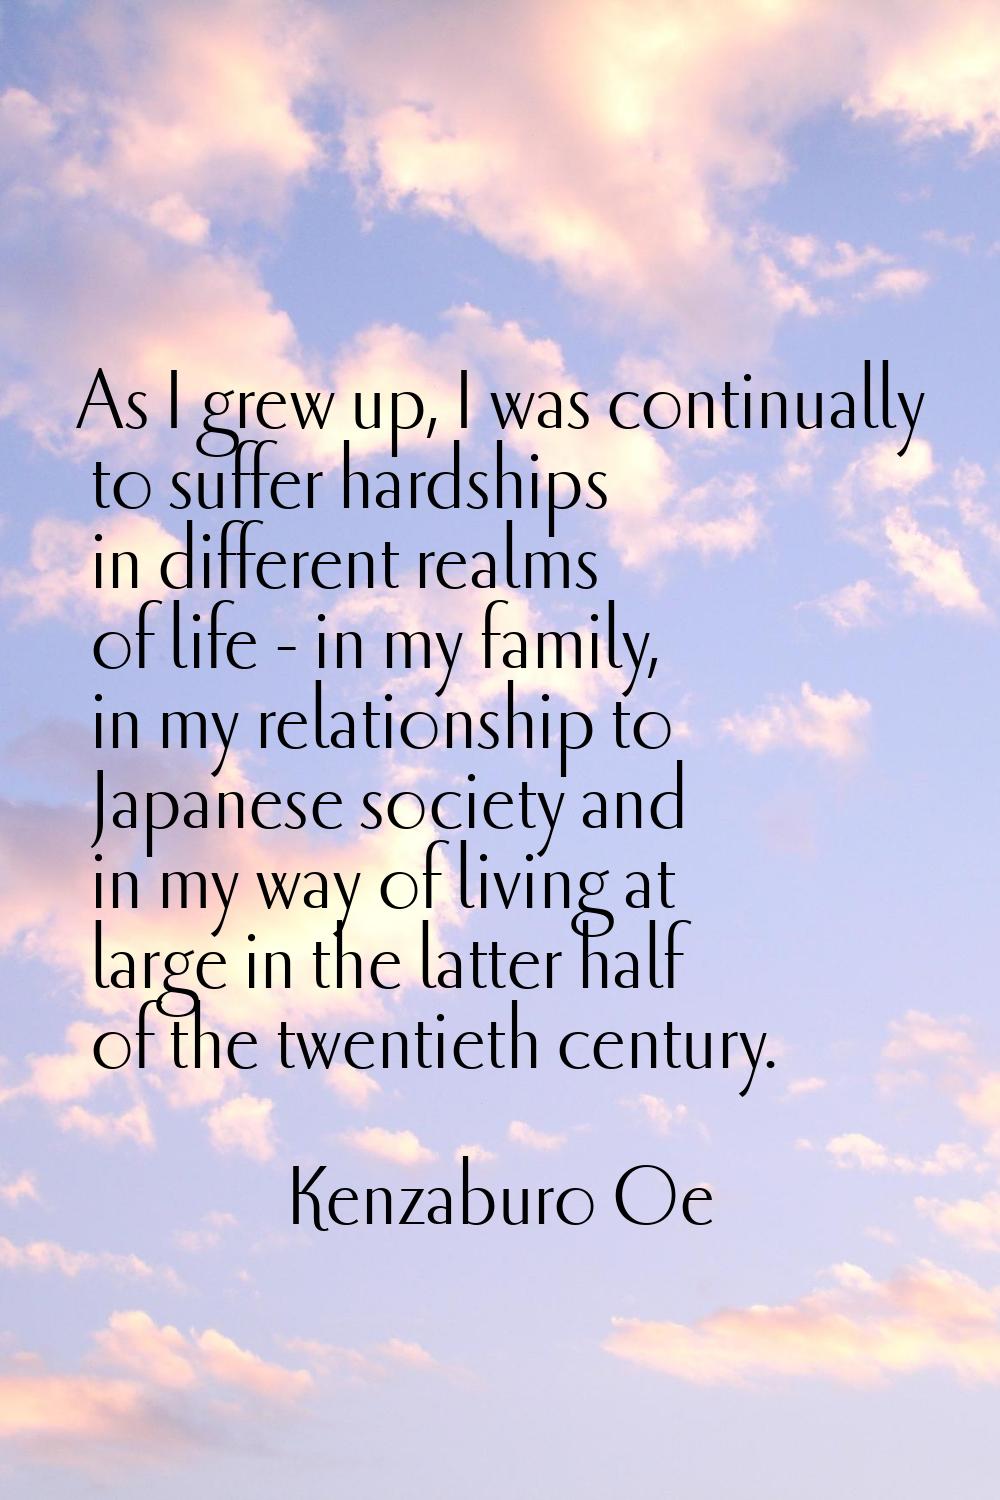 As I grew up, I was continually to suffer hardships in different realms of life - in my family, in 